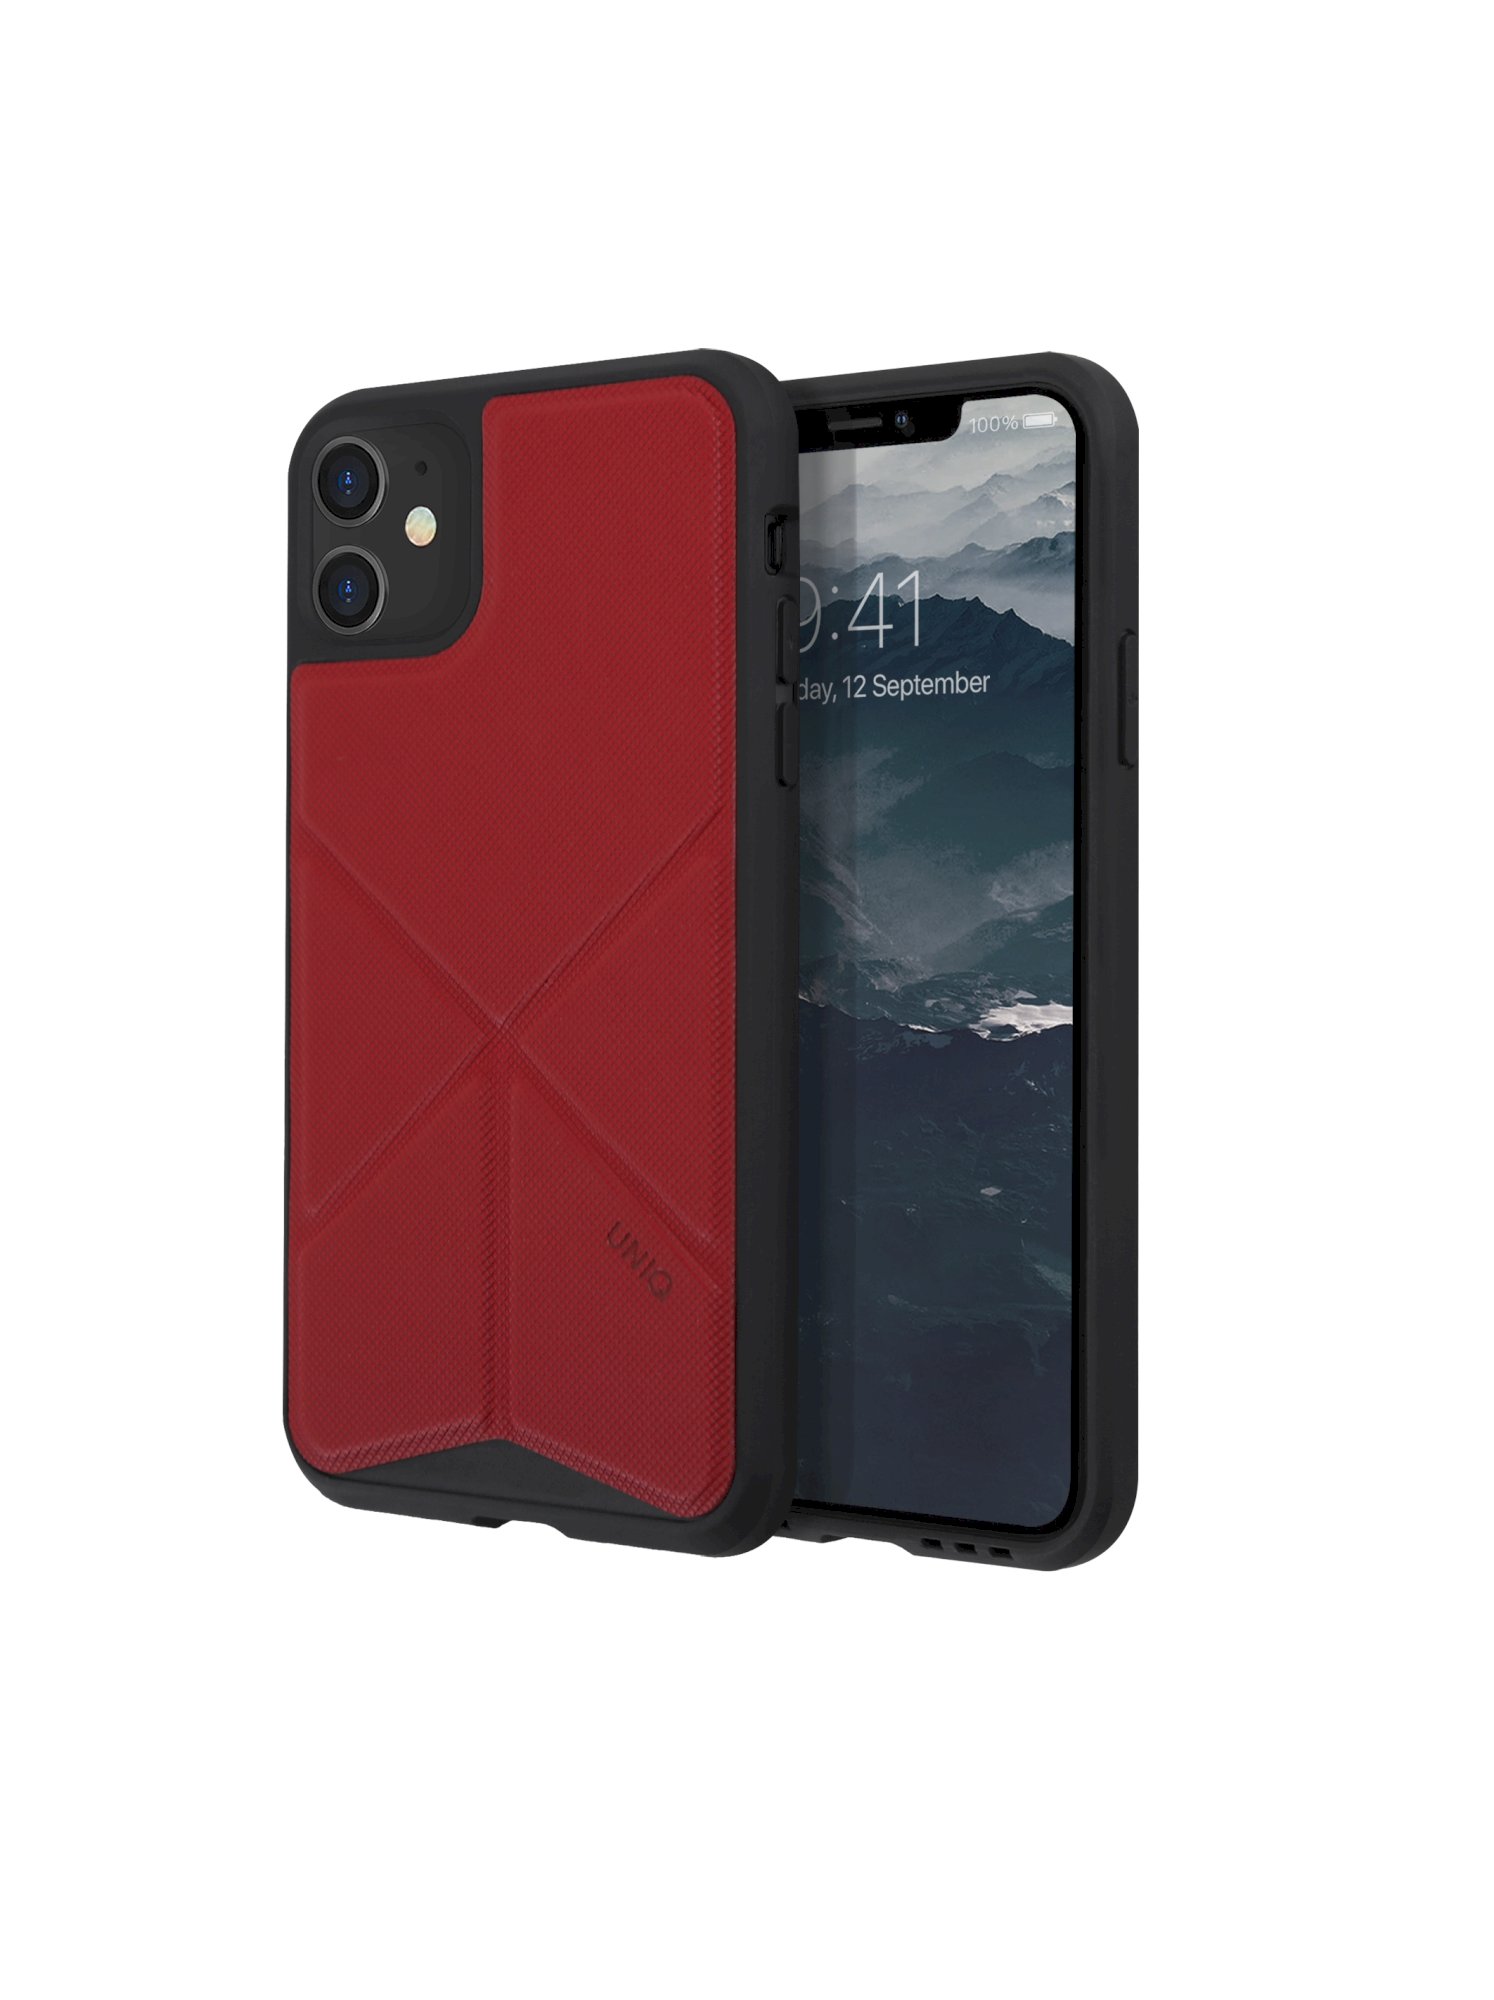 iPhone 11, case transforma, stand up fury racer, red